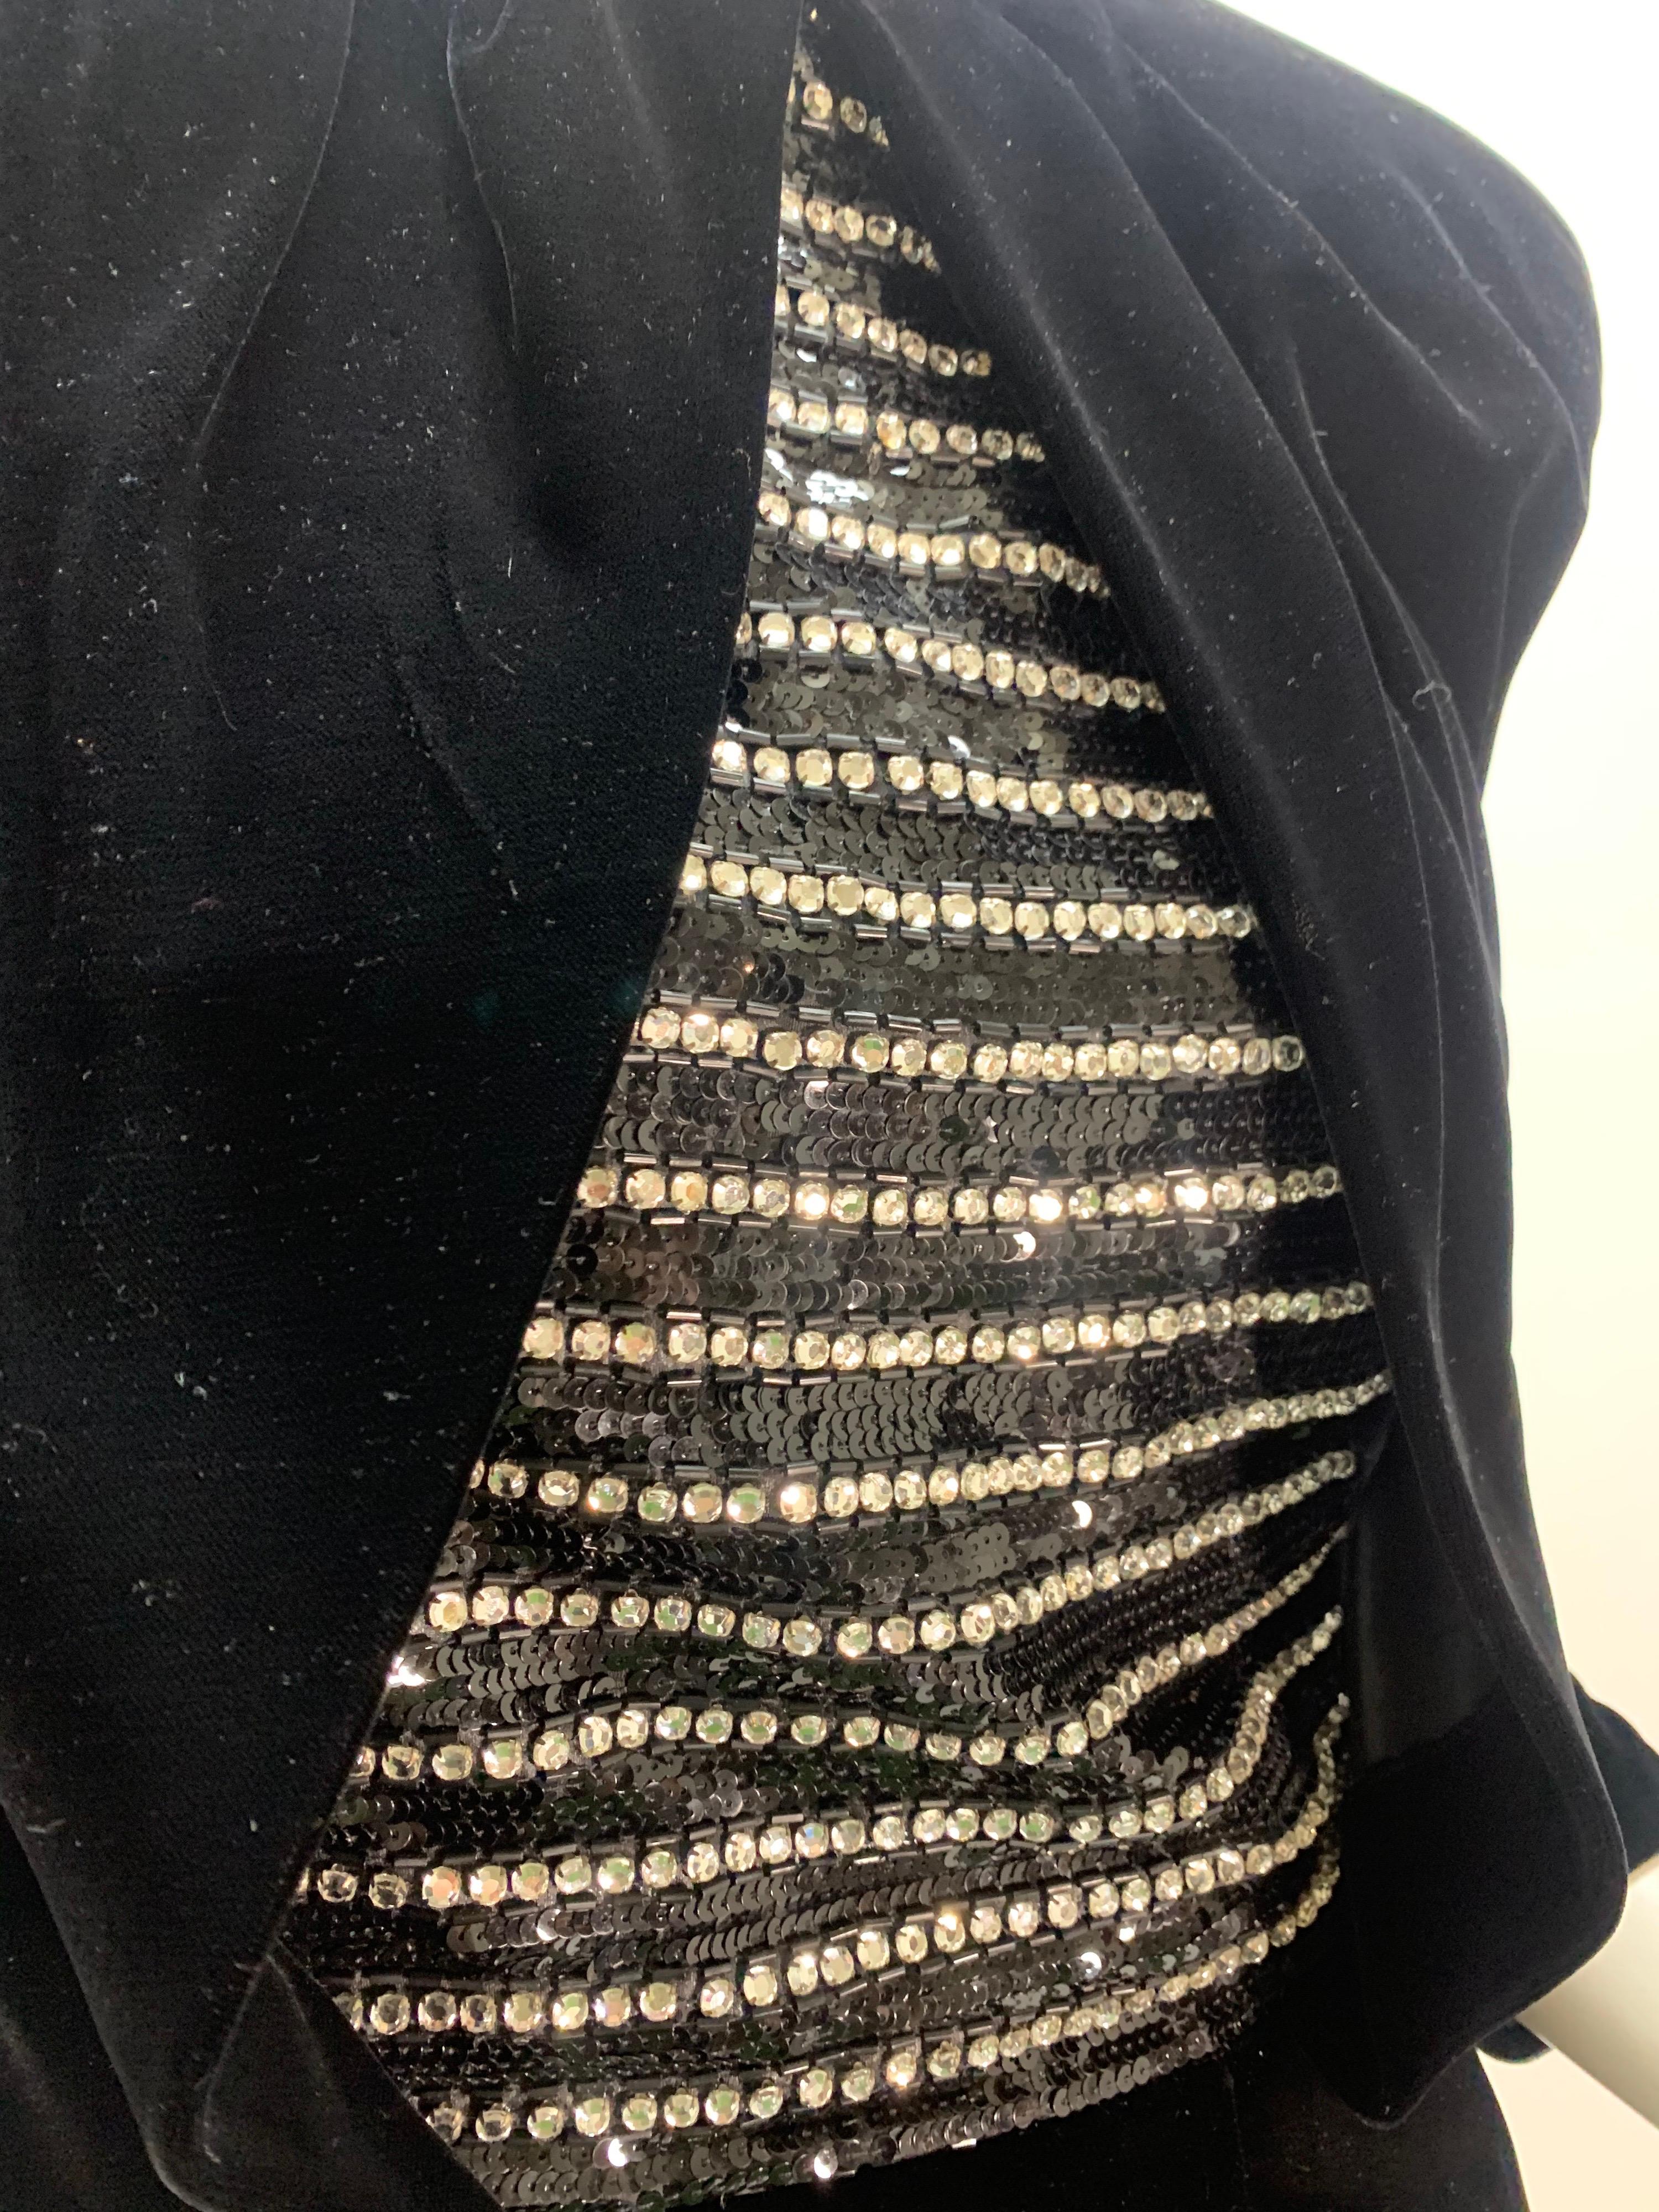 1980 Carolyne Roehm Black Velvet Cocktail Dress W/ Rhinestone & Sequin Stripes In Excellent Condition For Sale In Gresham, OR